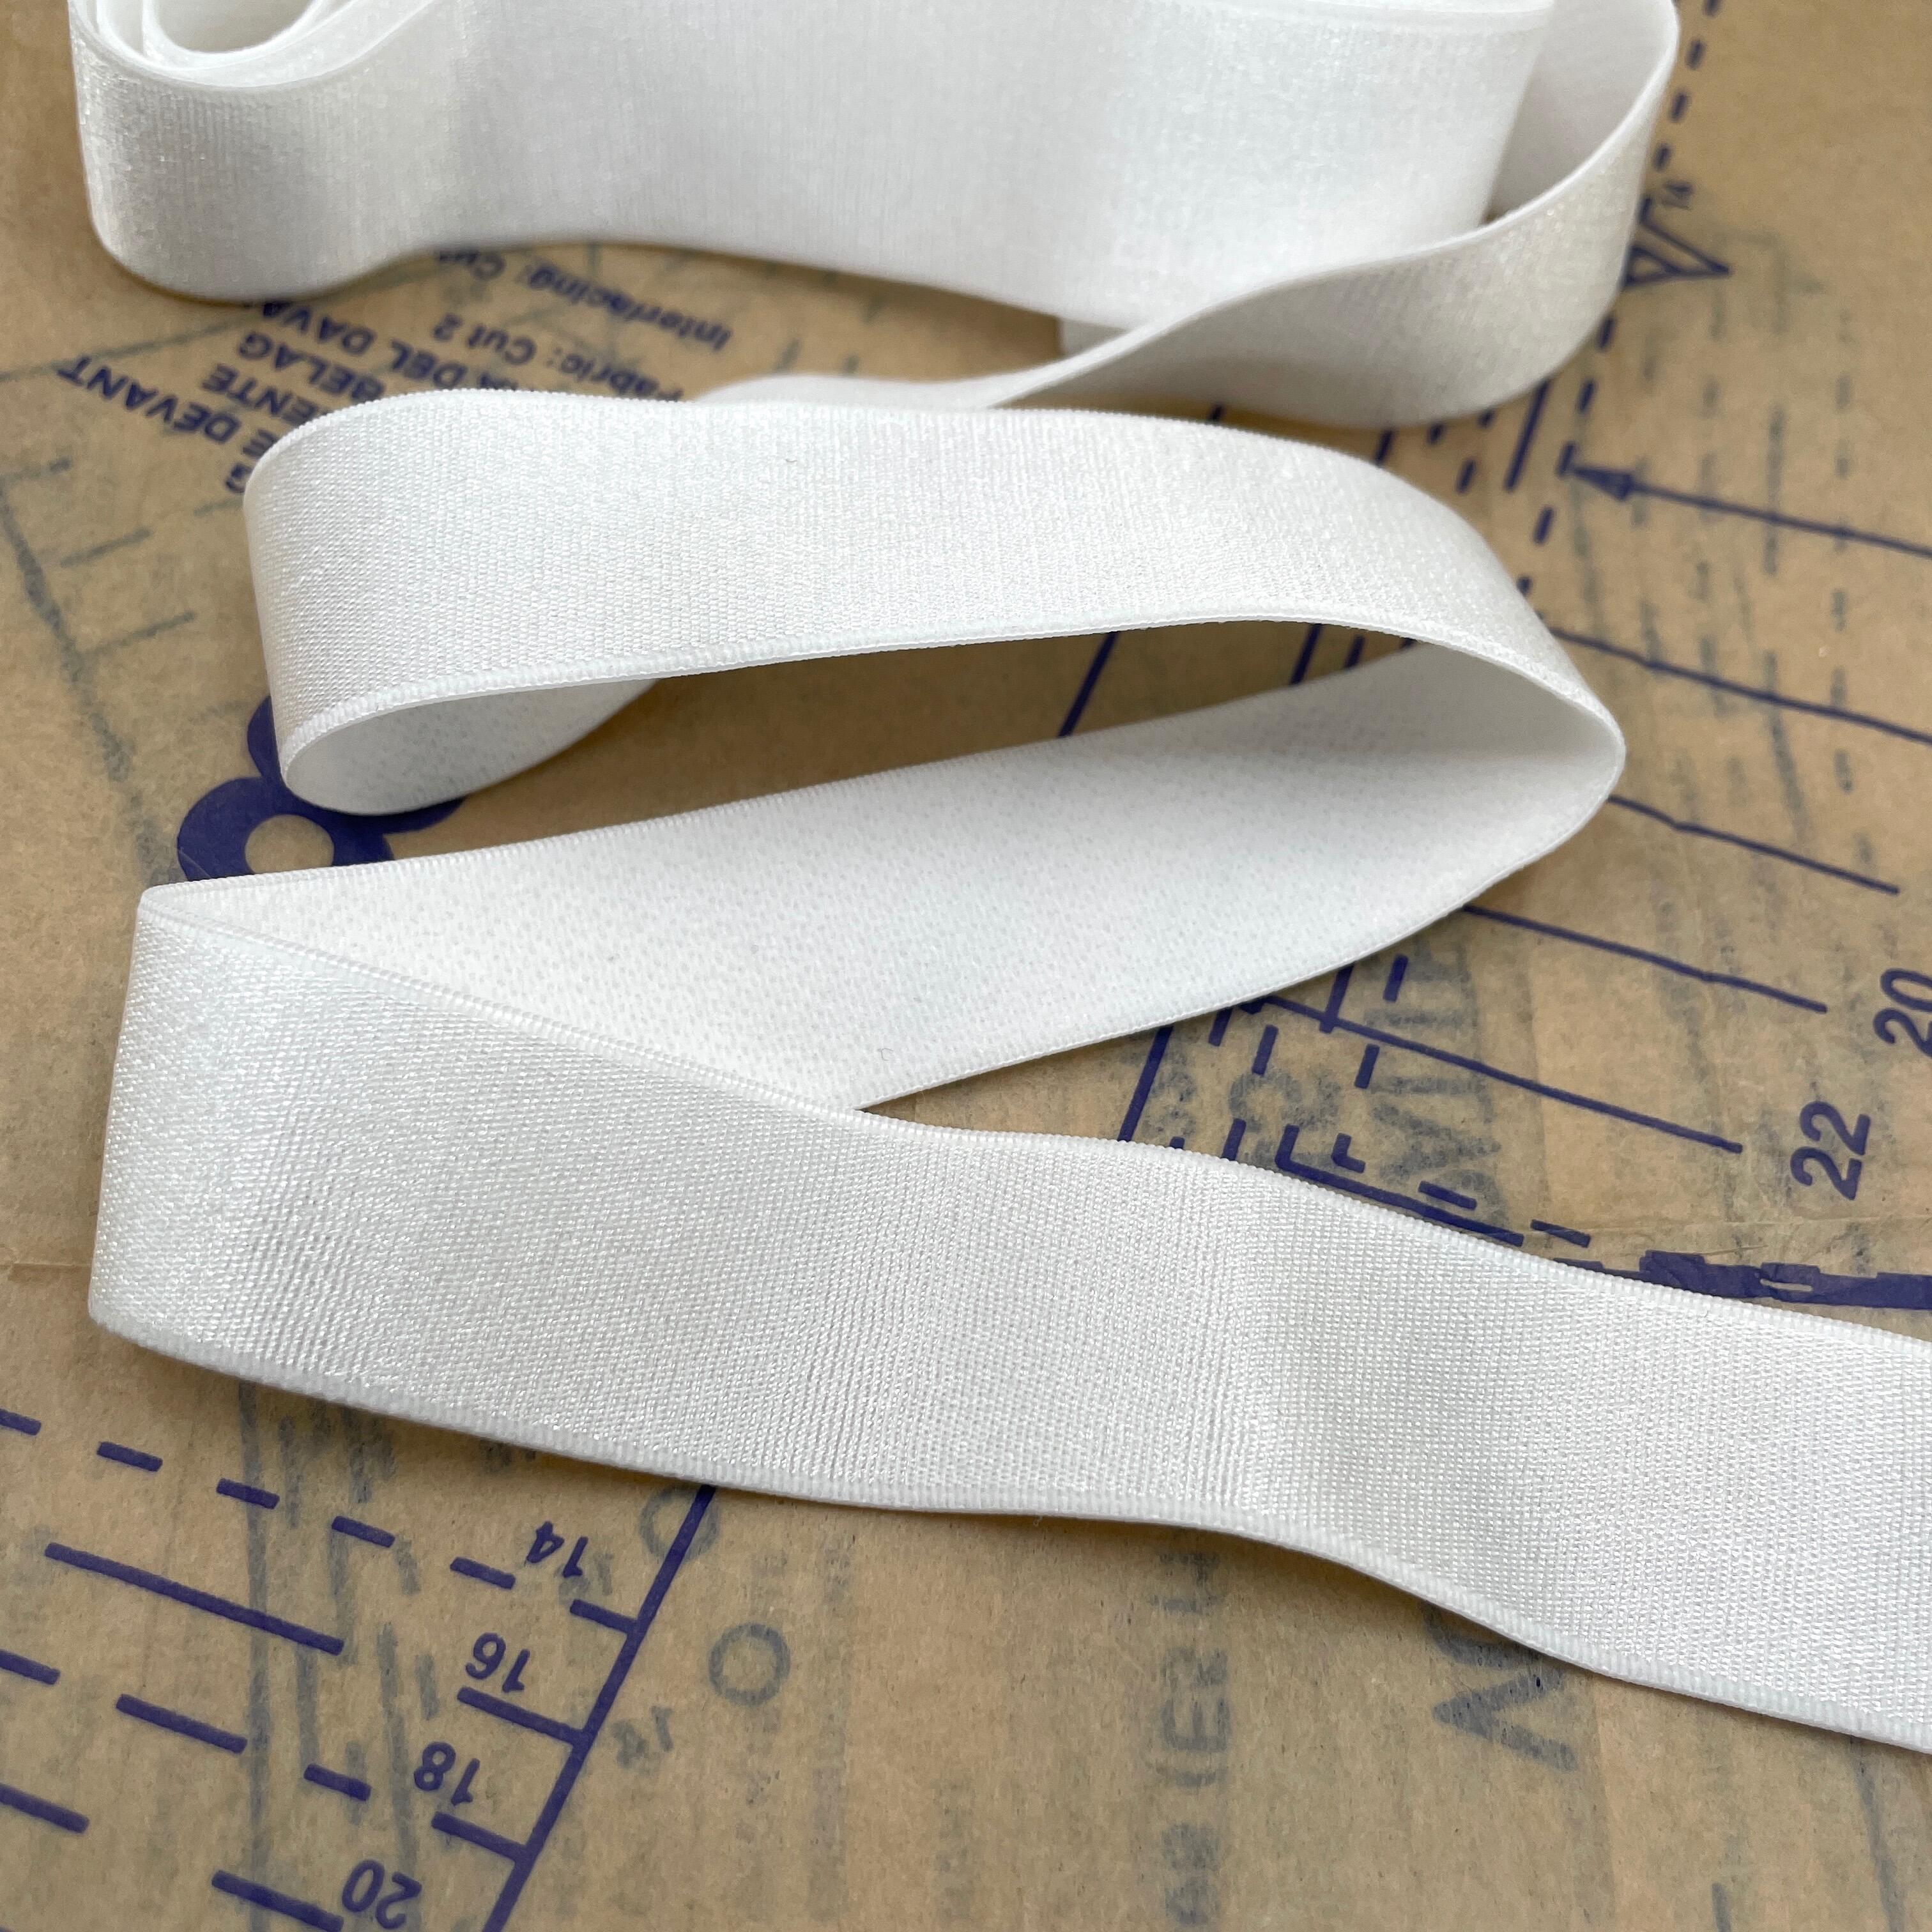 Bra Strap/Band & Suspender elastic - Soft & Stretchy (L32604) Shiny Face,  with soft back - 20mm WHITE